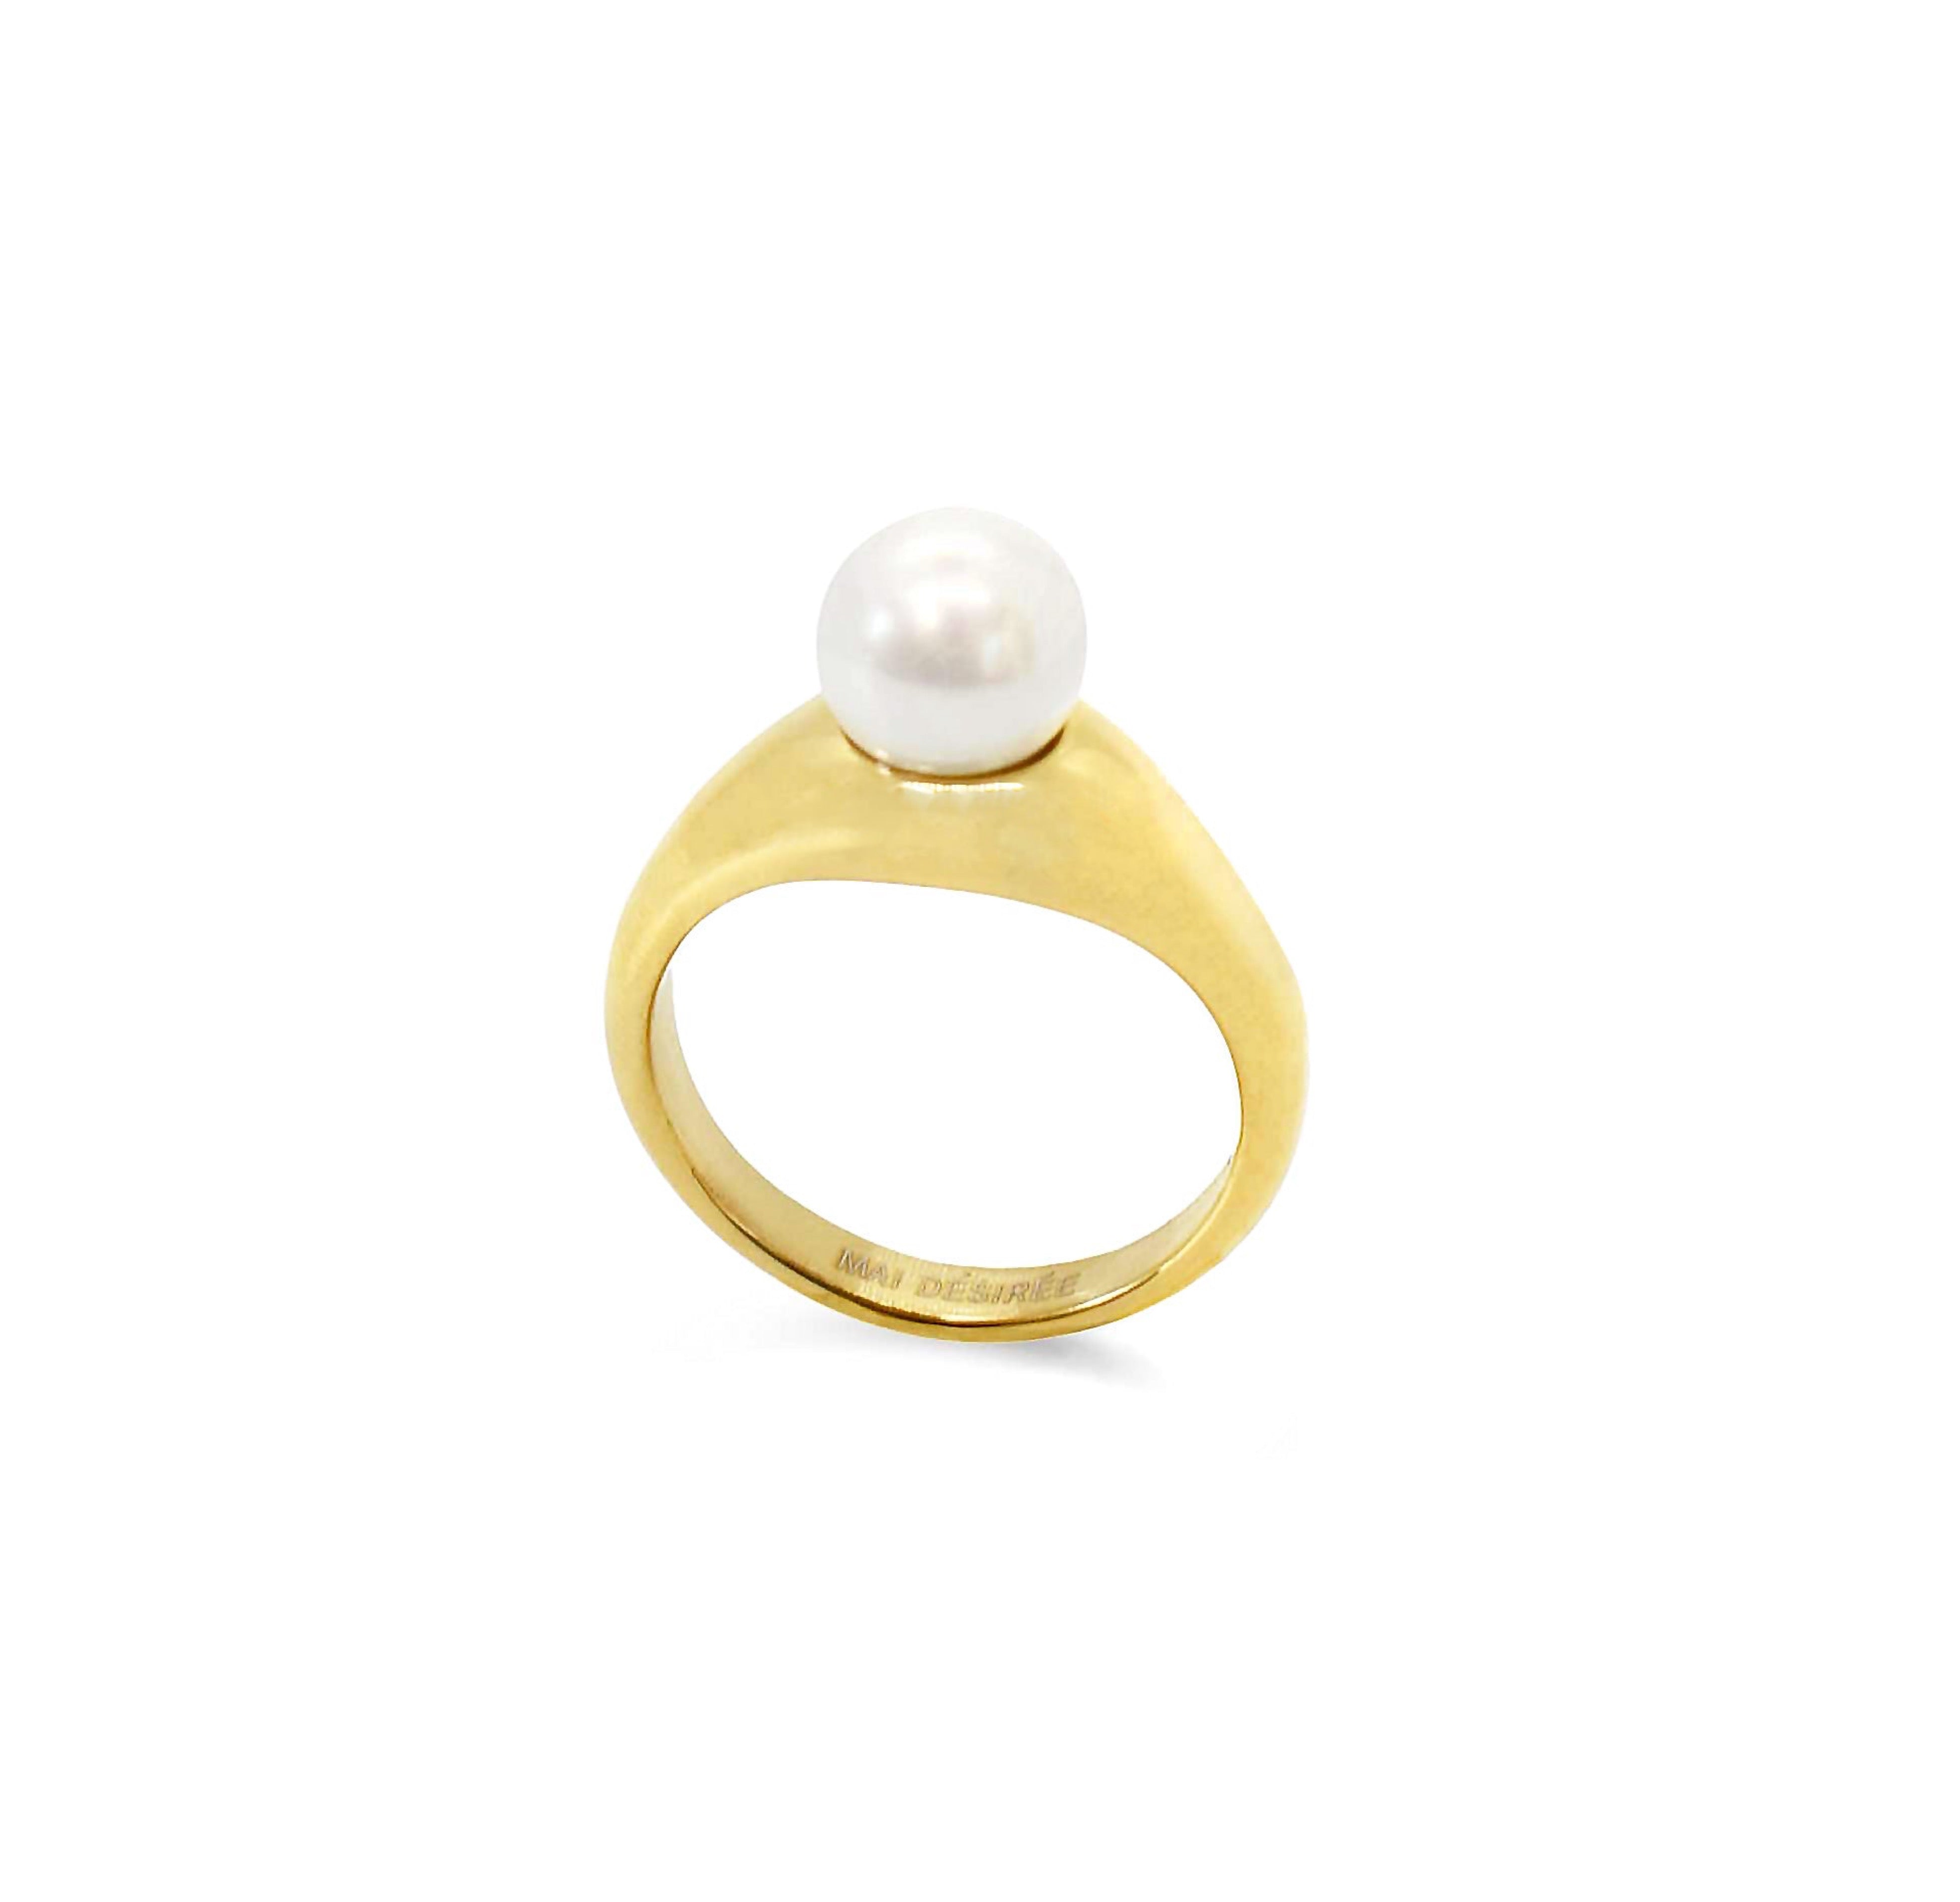 June gold pearl ring. Gold waterproof jewelry